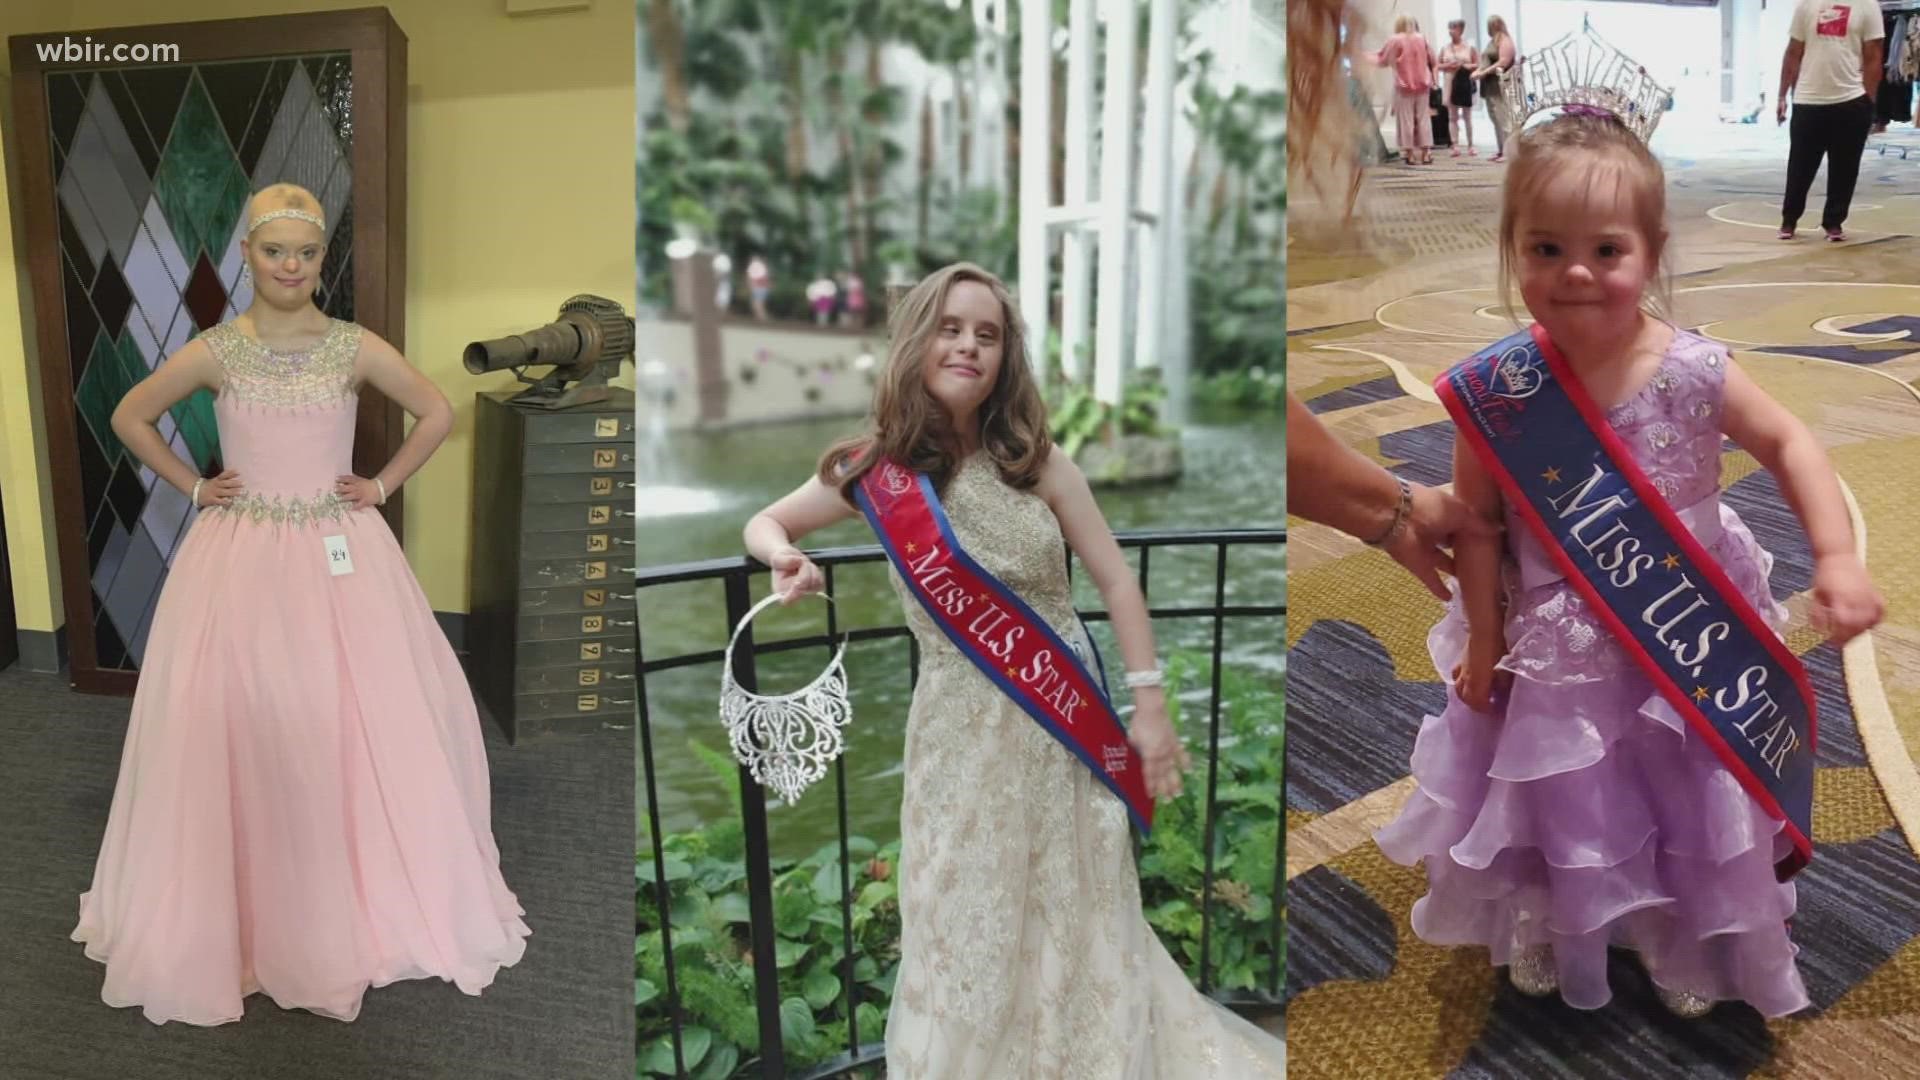 October is Down Syndrome Awareness Month and these three East Tennessee girls are proving their disabilities can't hold them back.